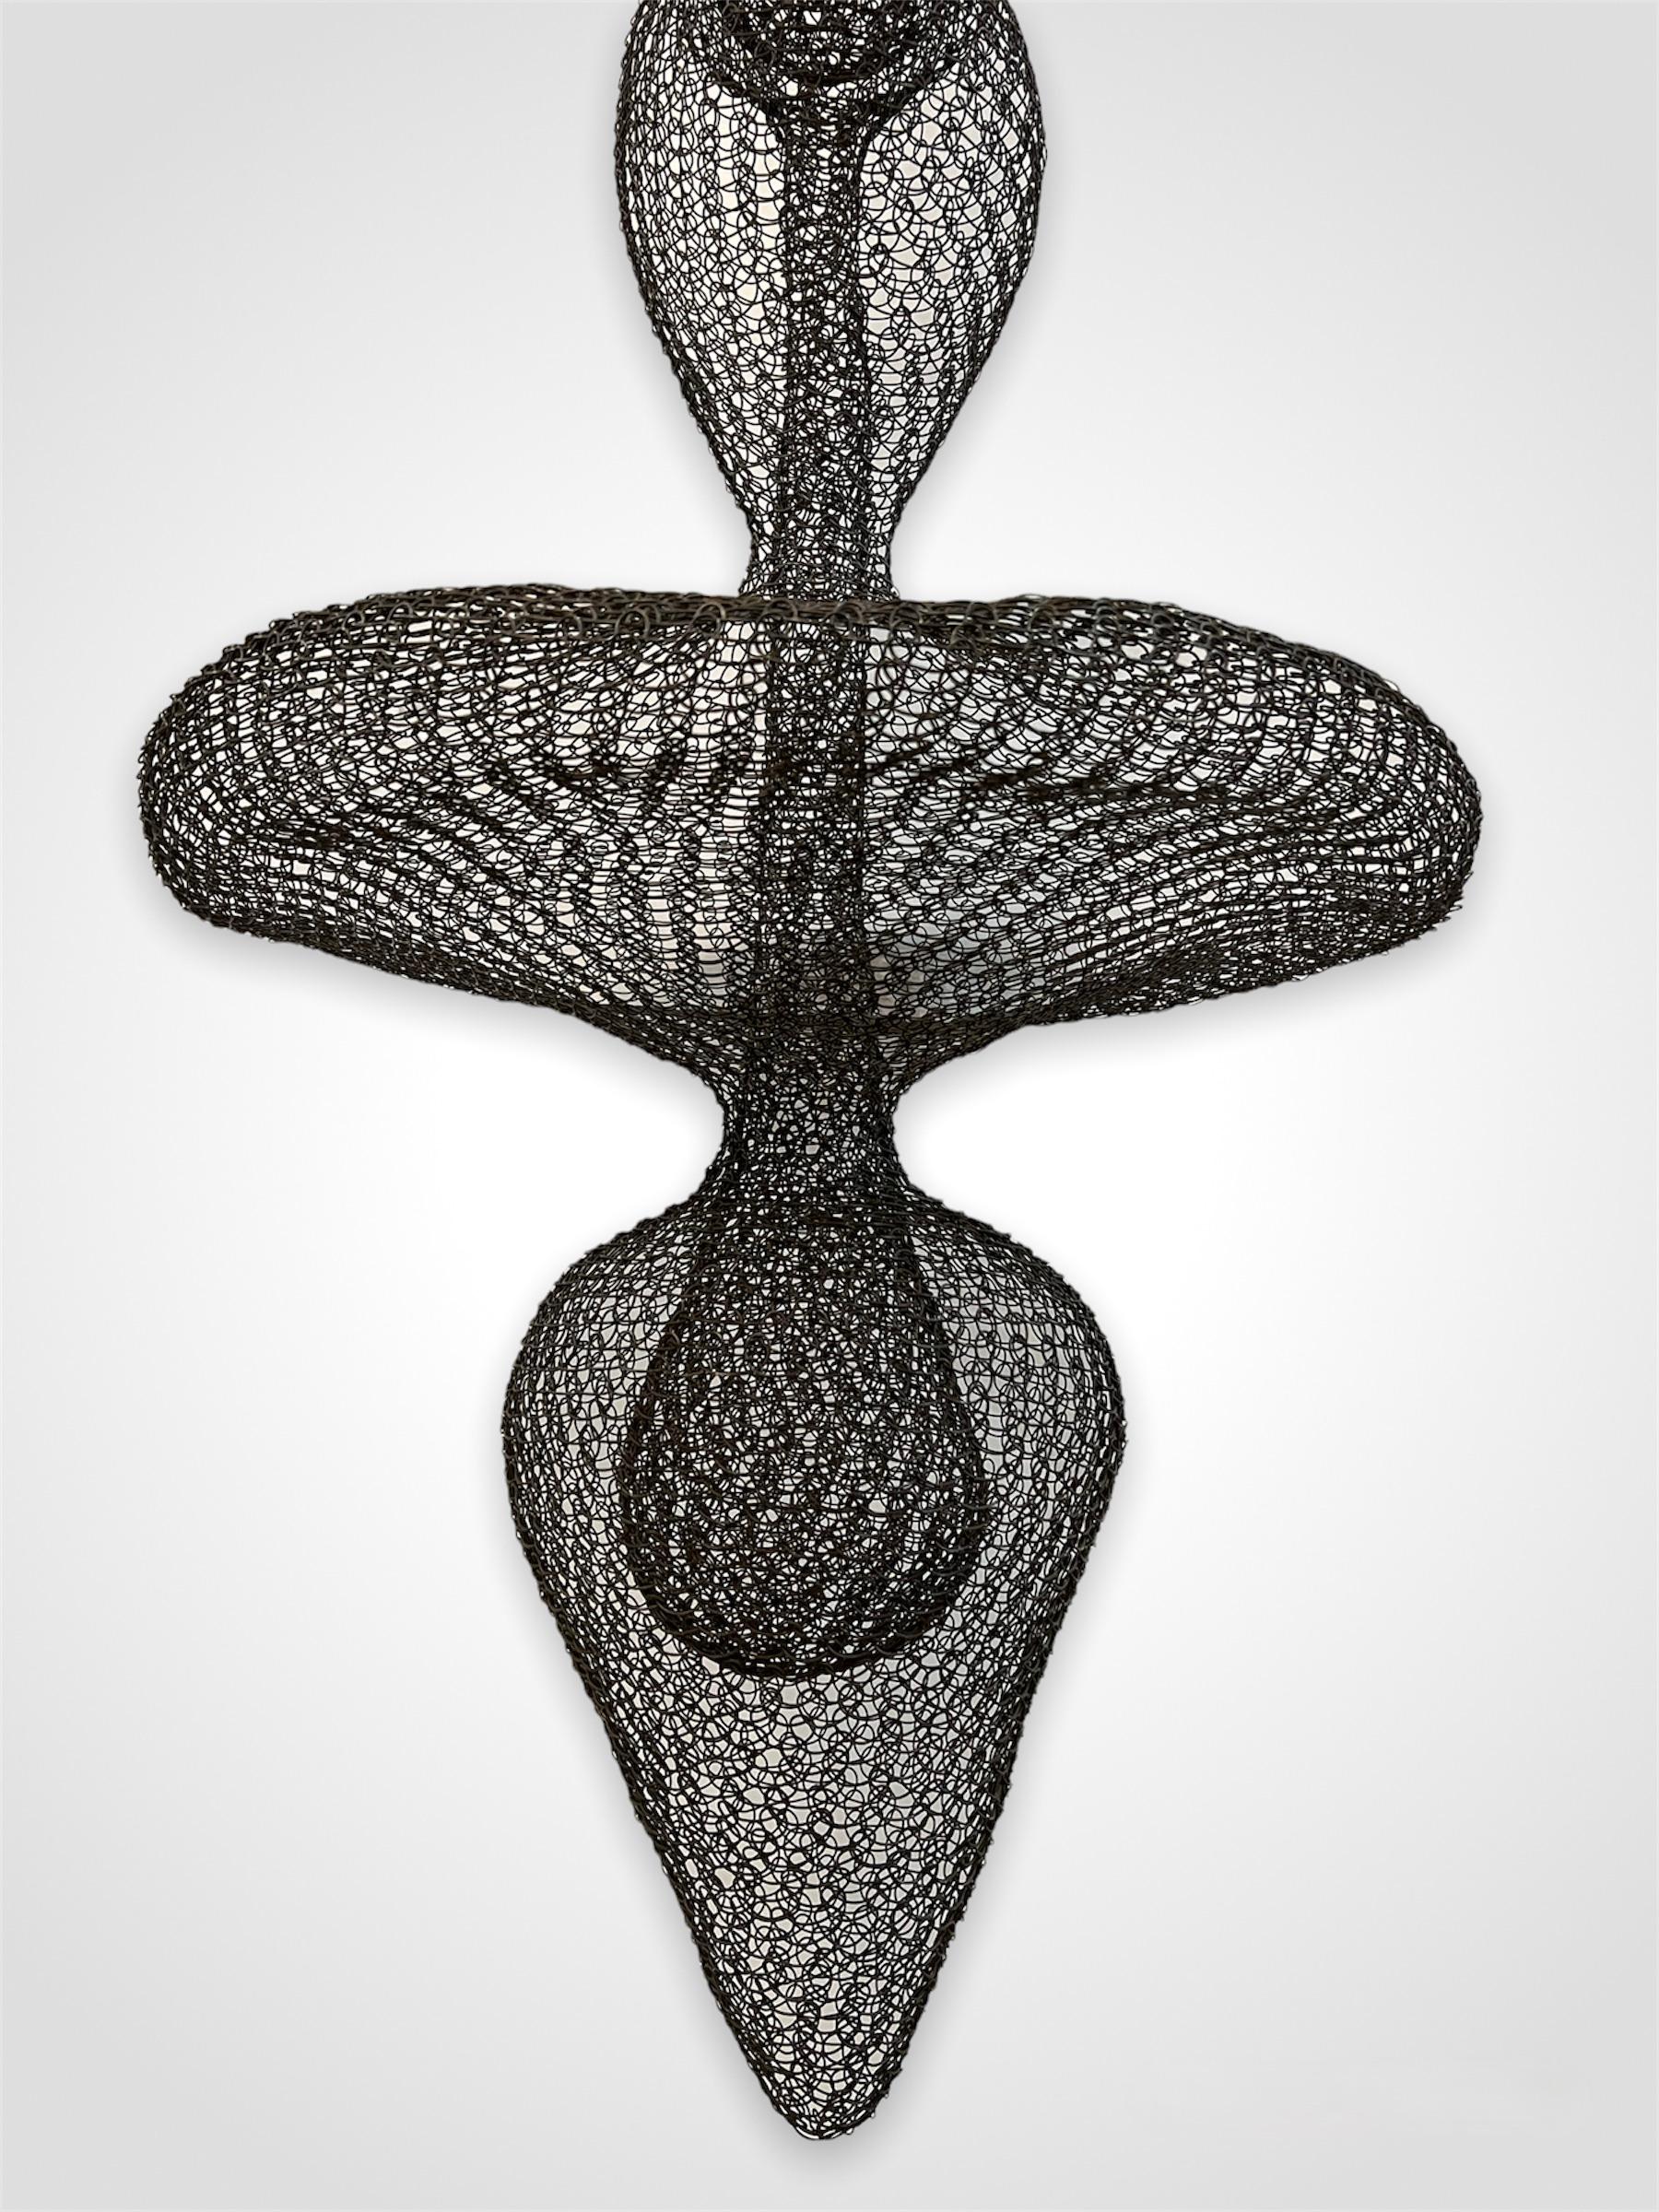 Organic Woven Mesh Wire Sculpture by Ulrikk Dufosse In Excellent Condition For Sale In New York, NY